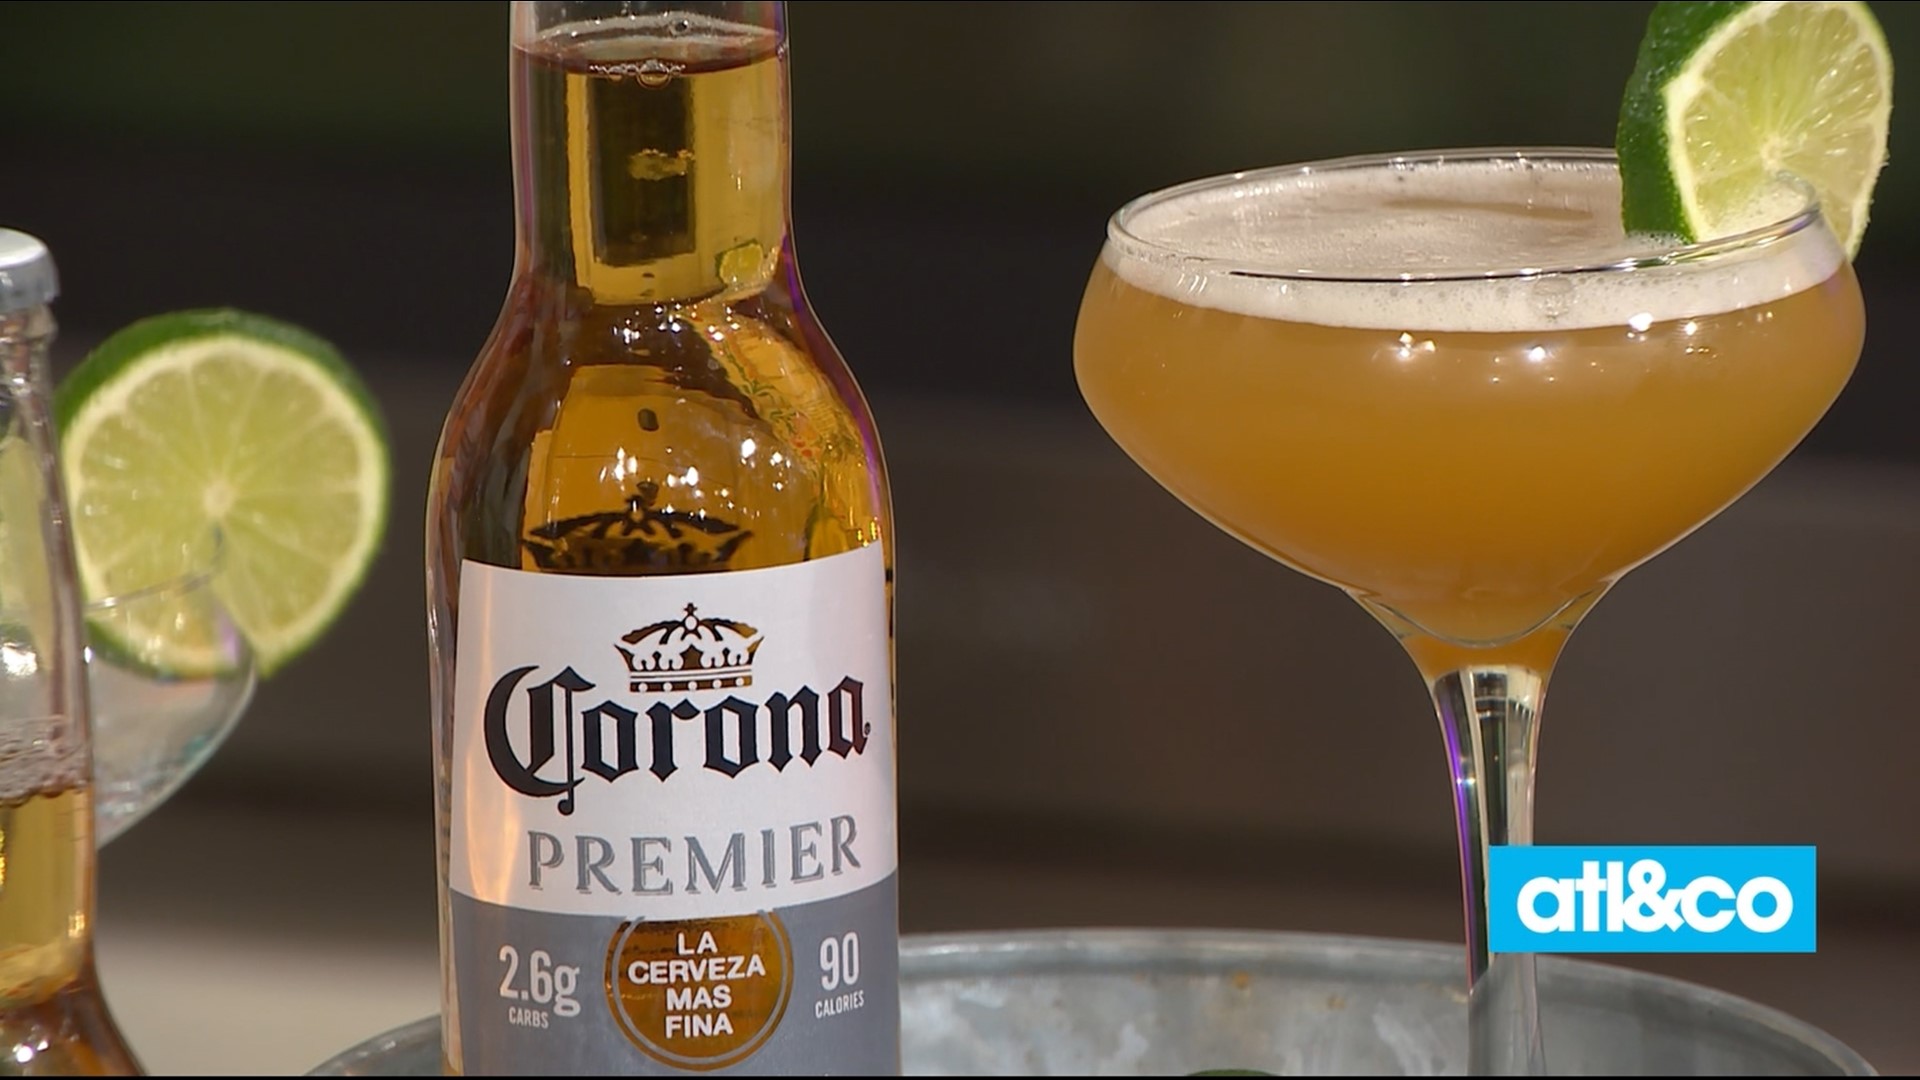 Chef Mali Wilson whips up a quick and easy brown rice bowl and toasts with a Corona Premier Skinny Mango Coronarita.